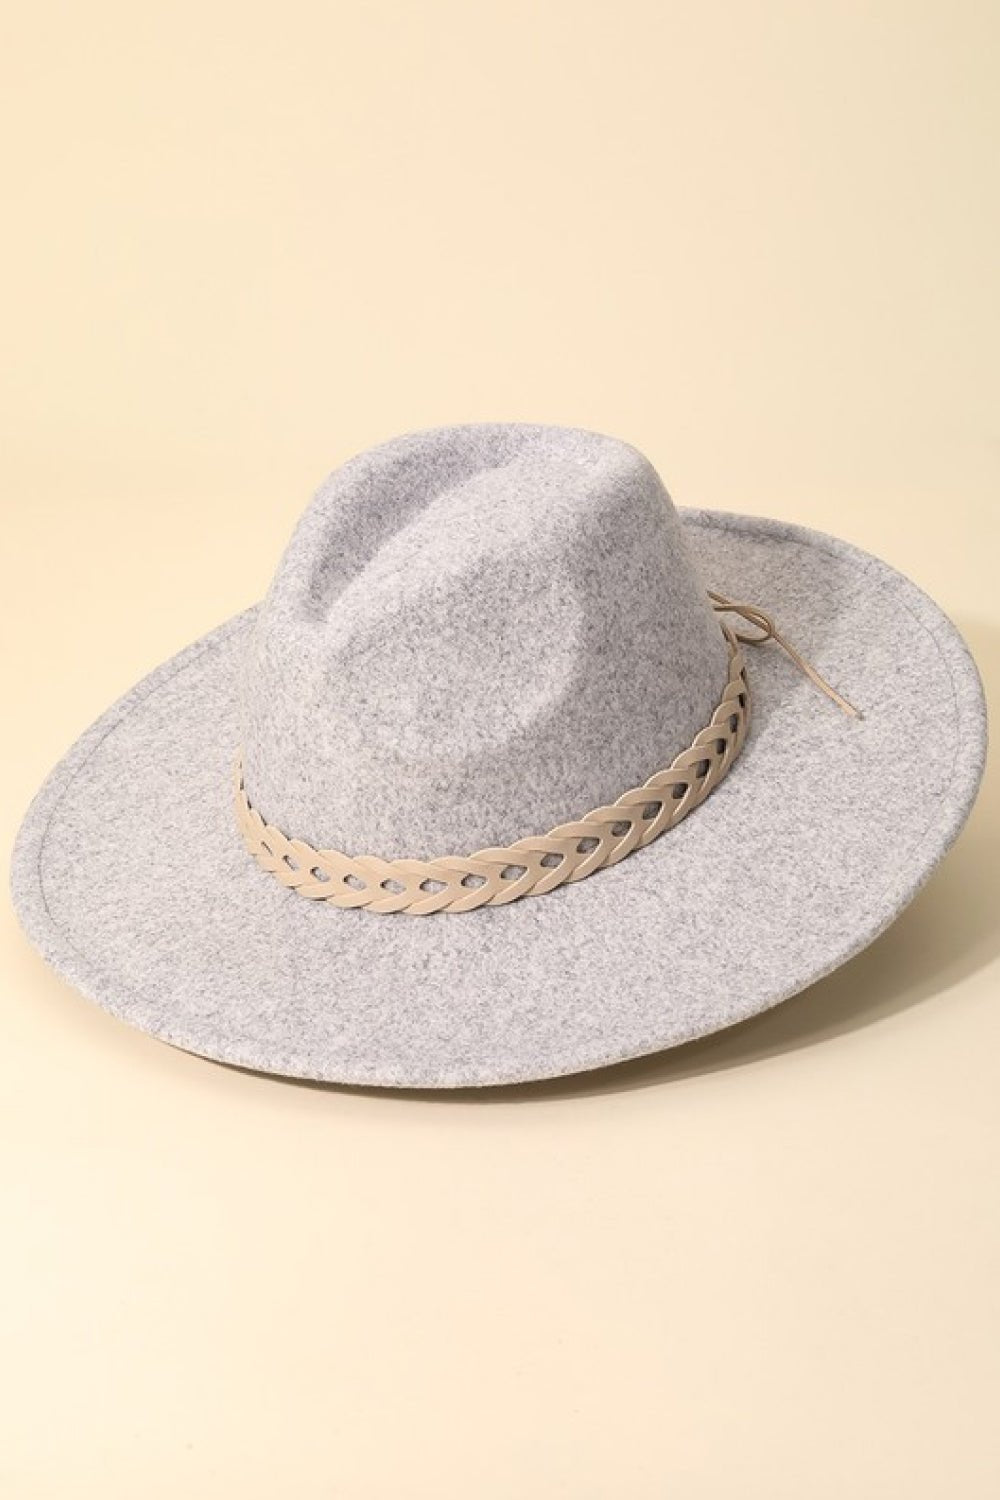 Fame Woven Together Braided Strap Fedora - Guy Christopher